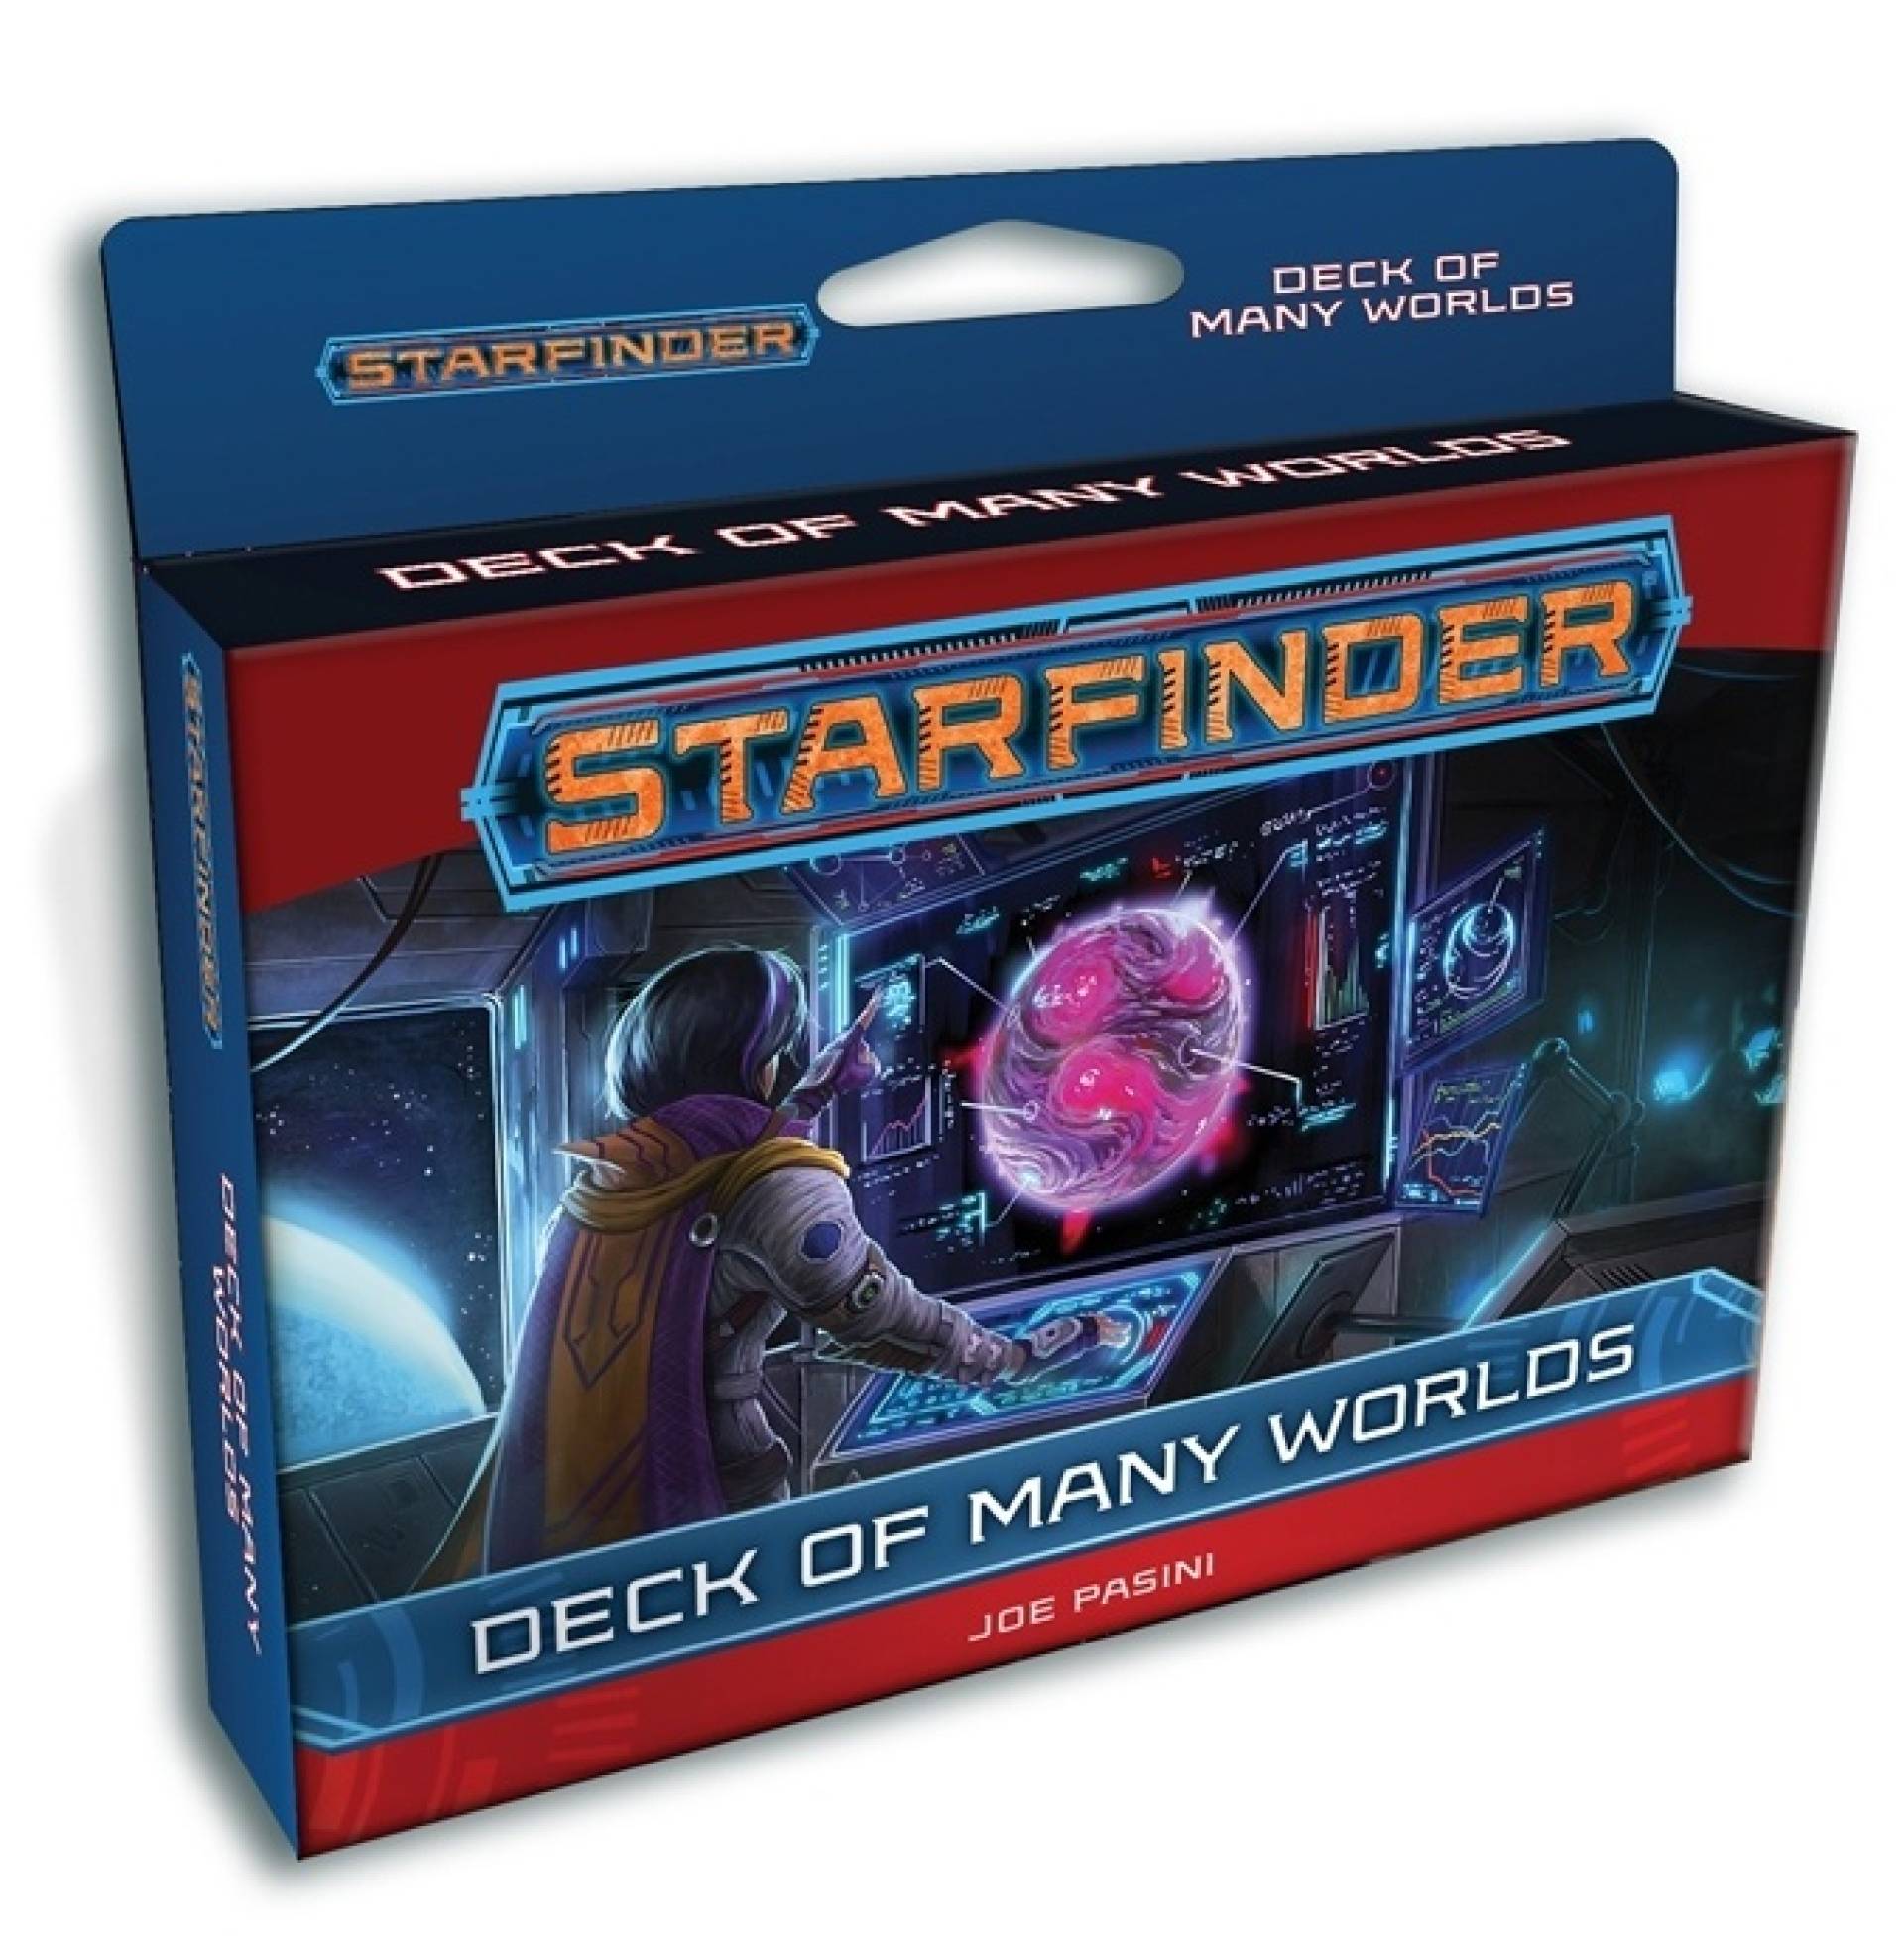 Starfinder Deck of Many Worlds: disponibile la nuova espansione thumbnail